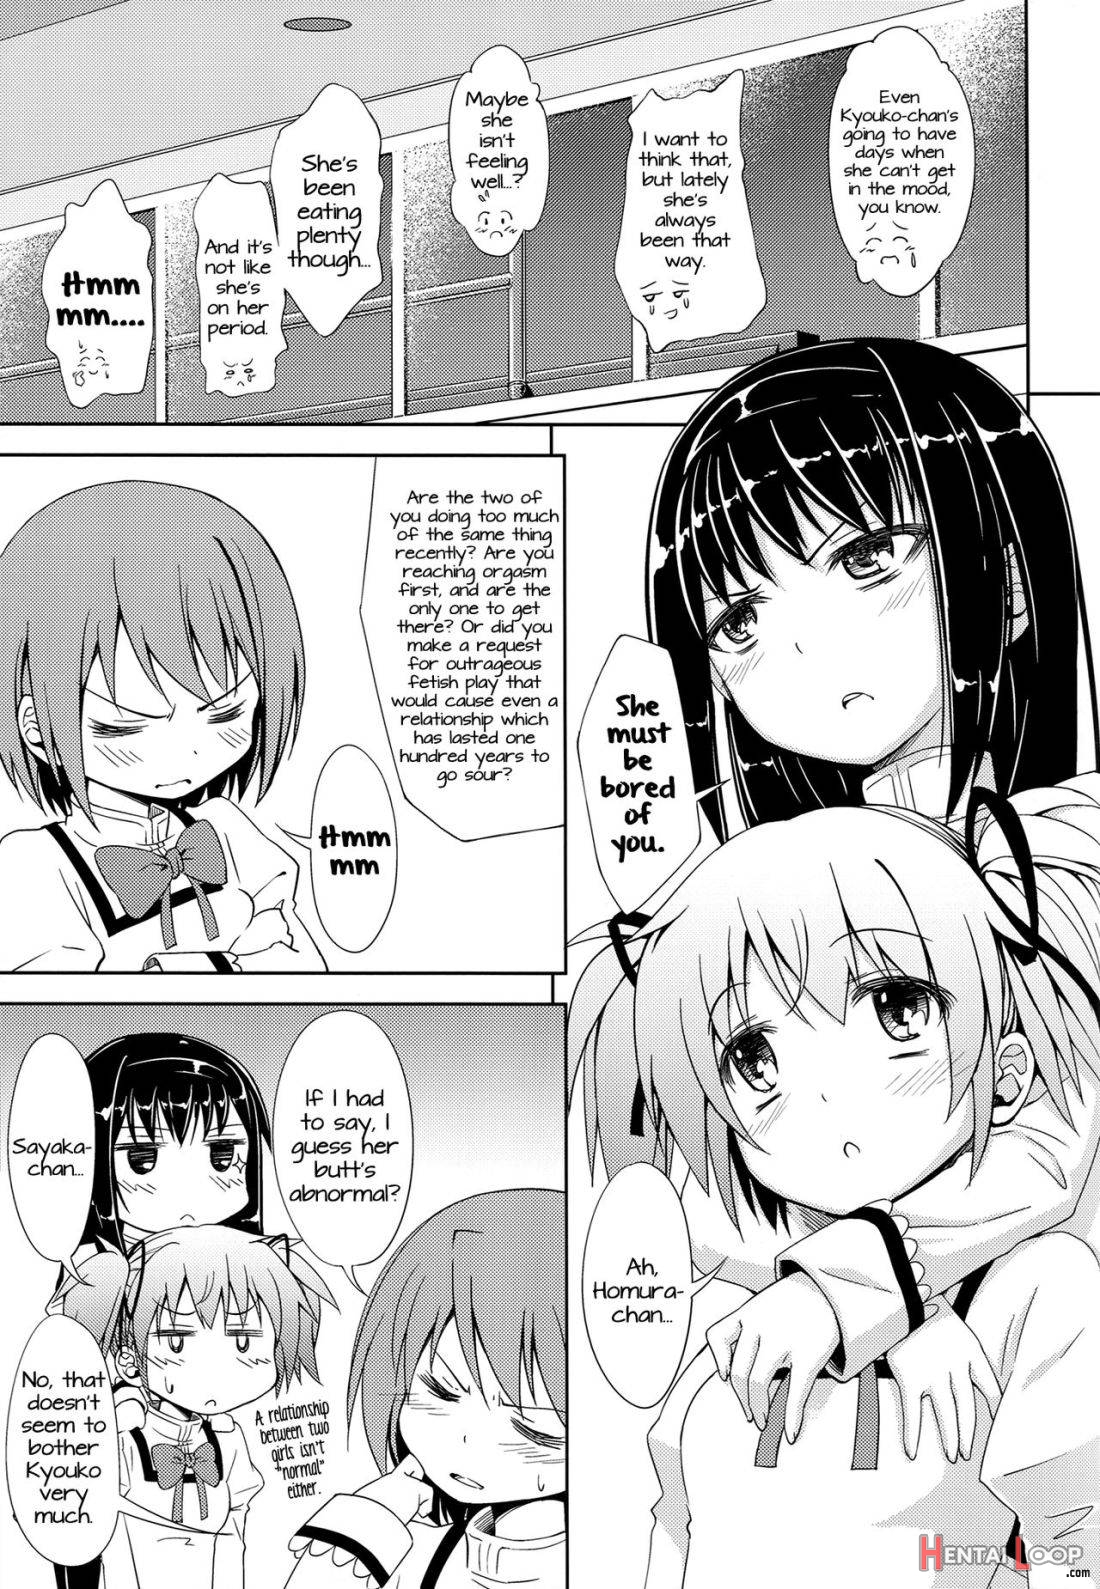 Lovely Girls' Lily Vol.4 page 6